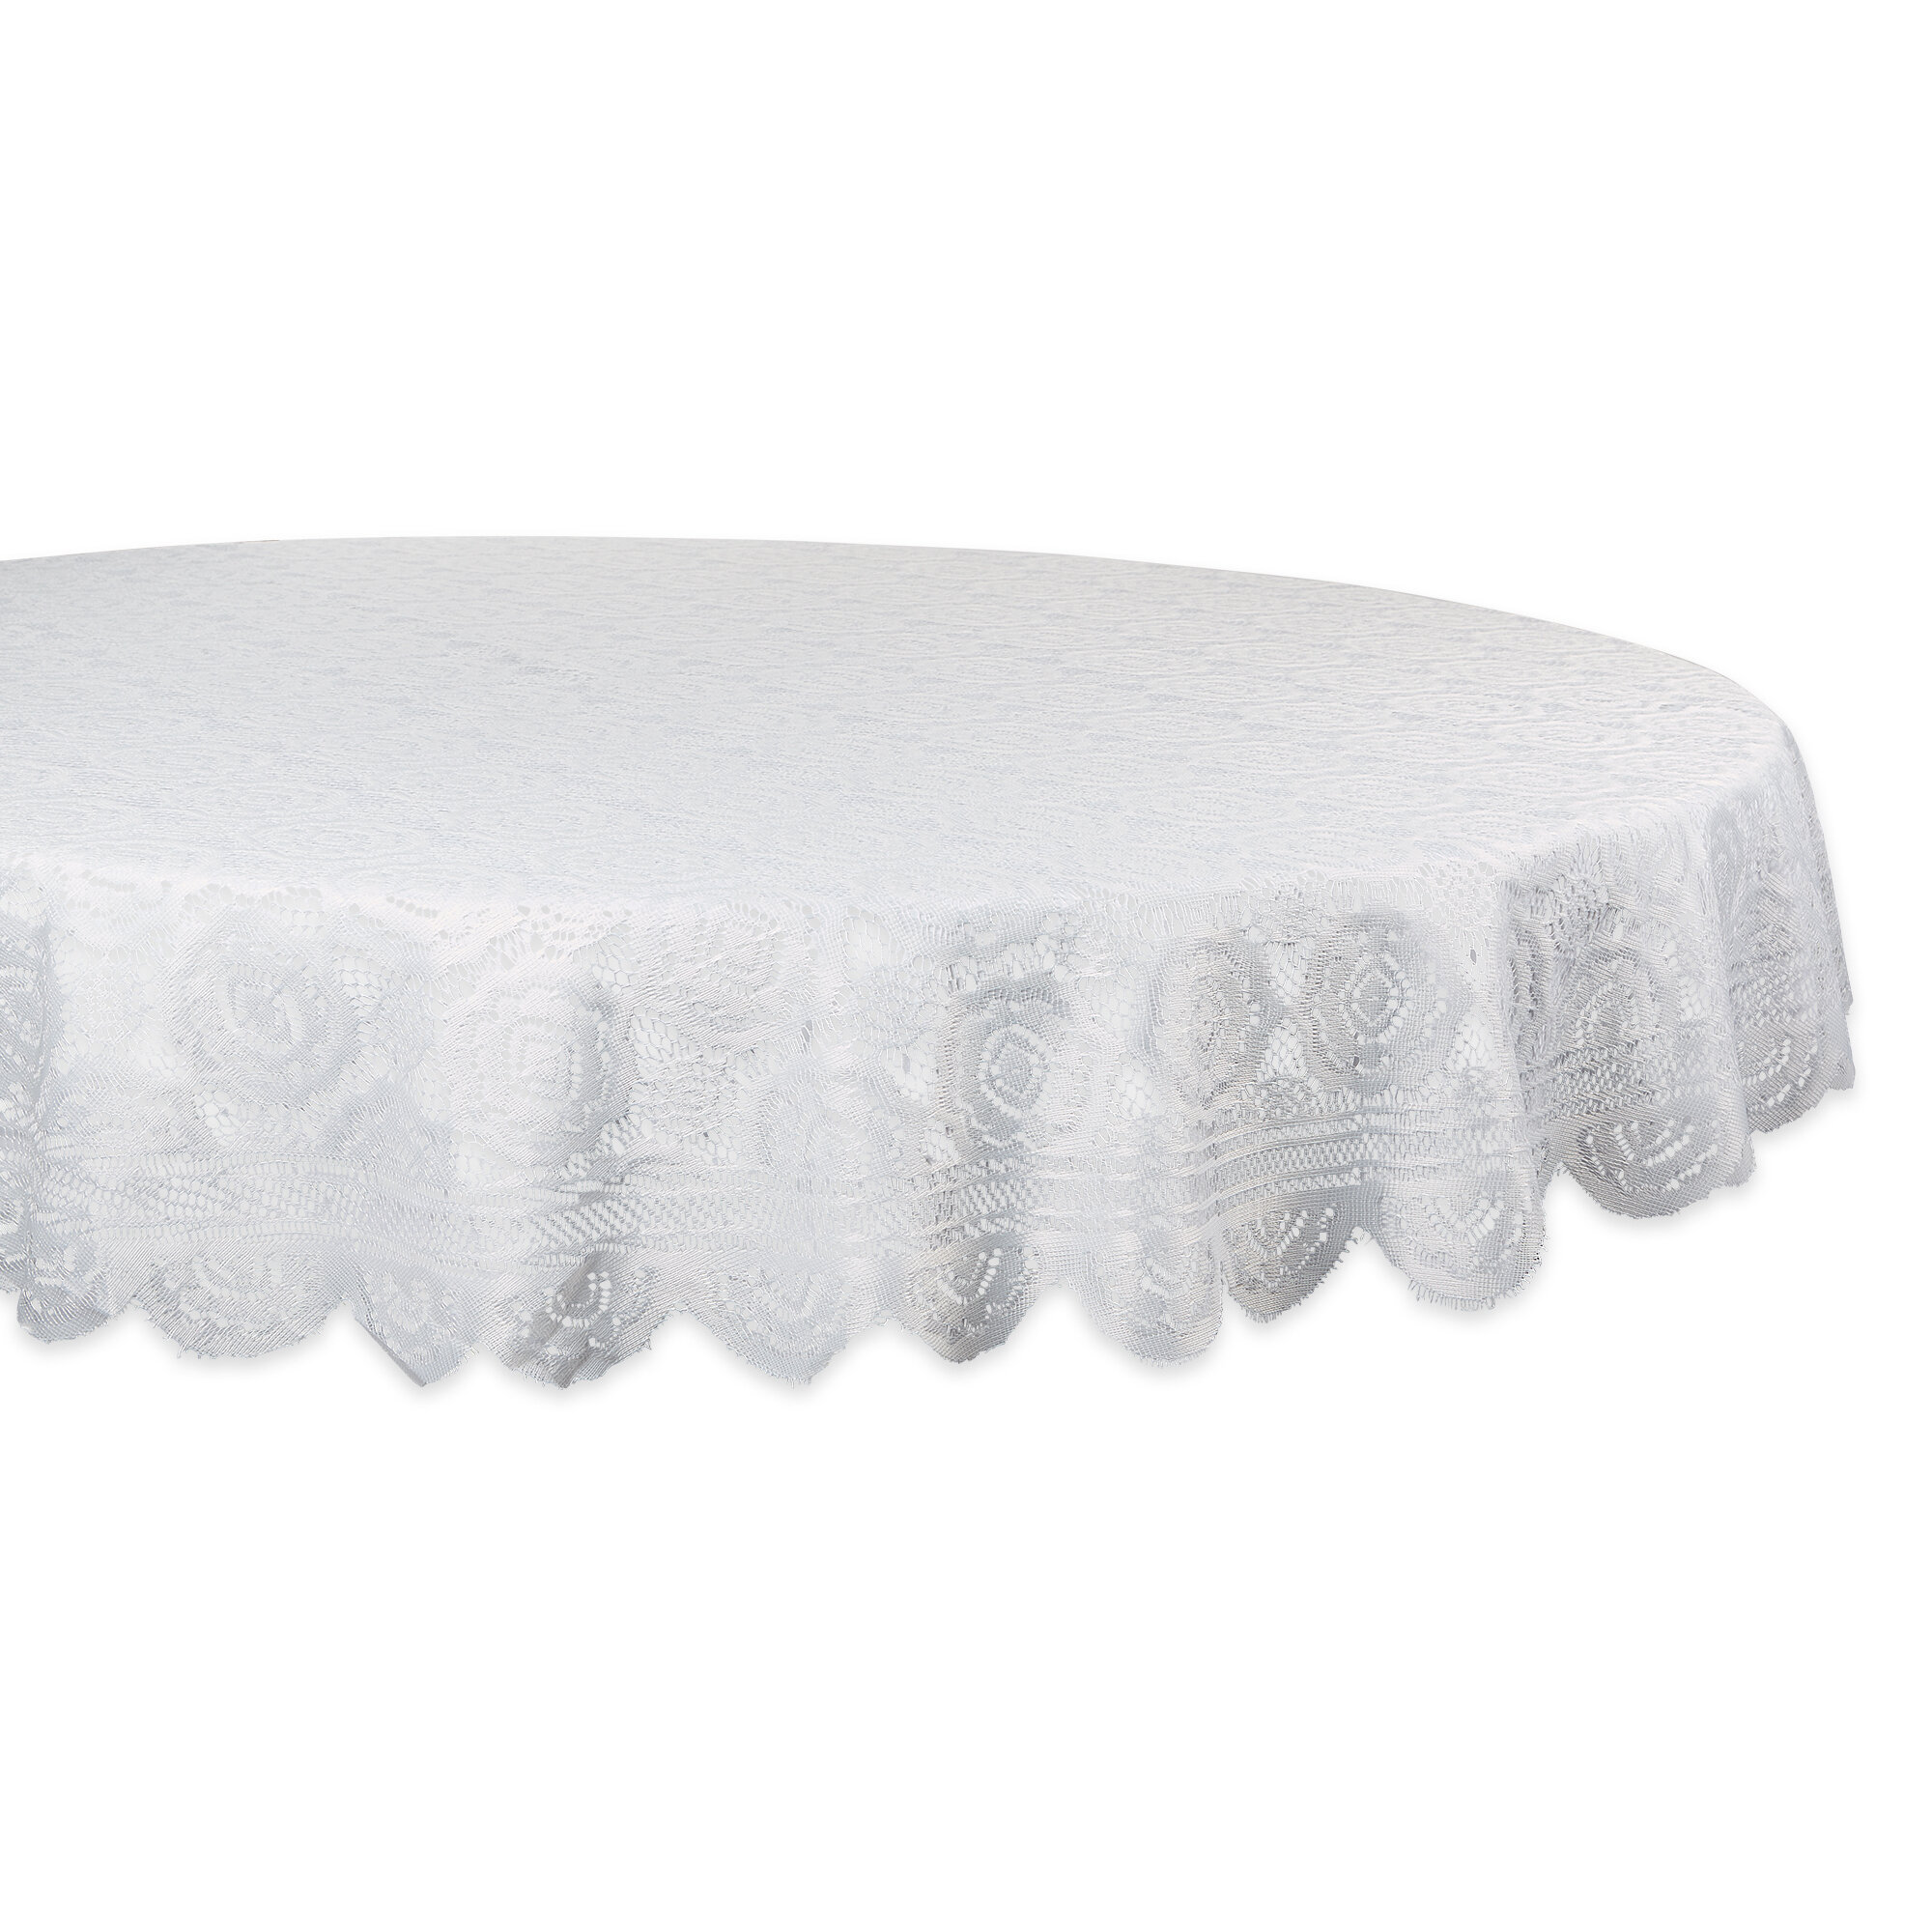 Ophelia & Co. Indiana Round Lace Tablecloth & Reviews | Wayfair